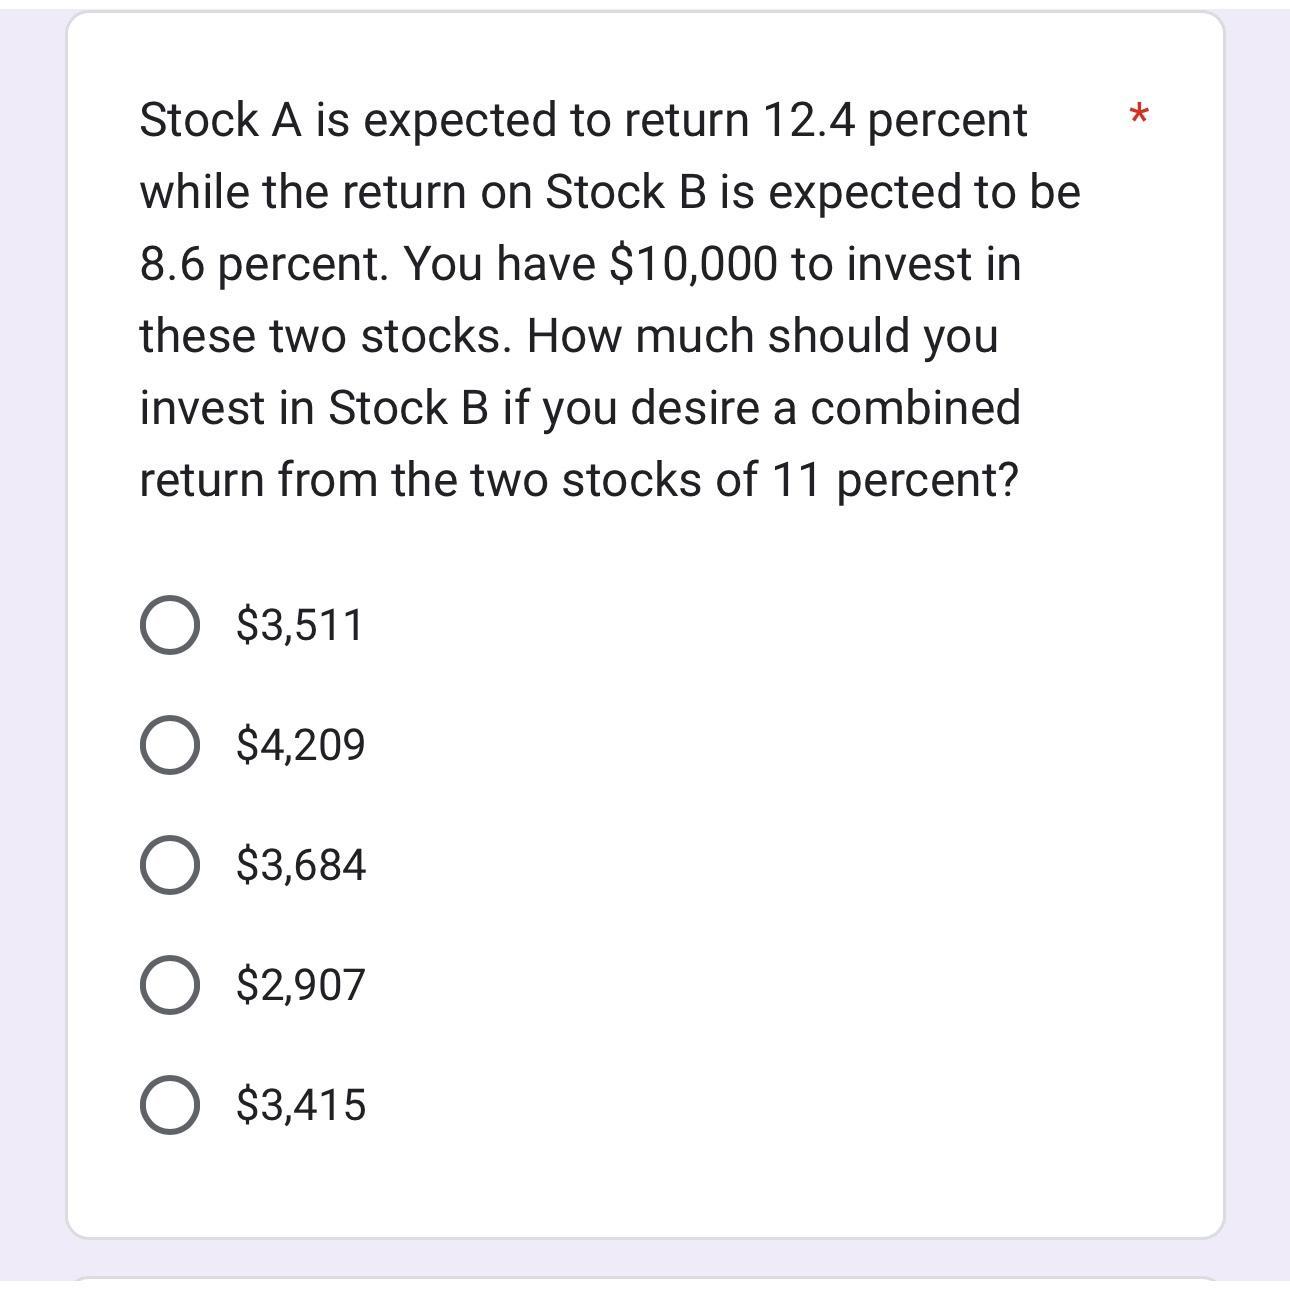 Stock A is expected to return 12.4 percent while the return on Stock B is expected to be 8.6 percent. You